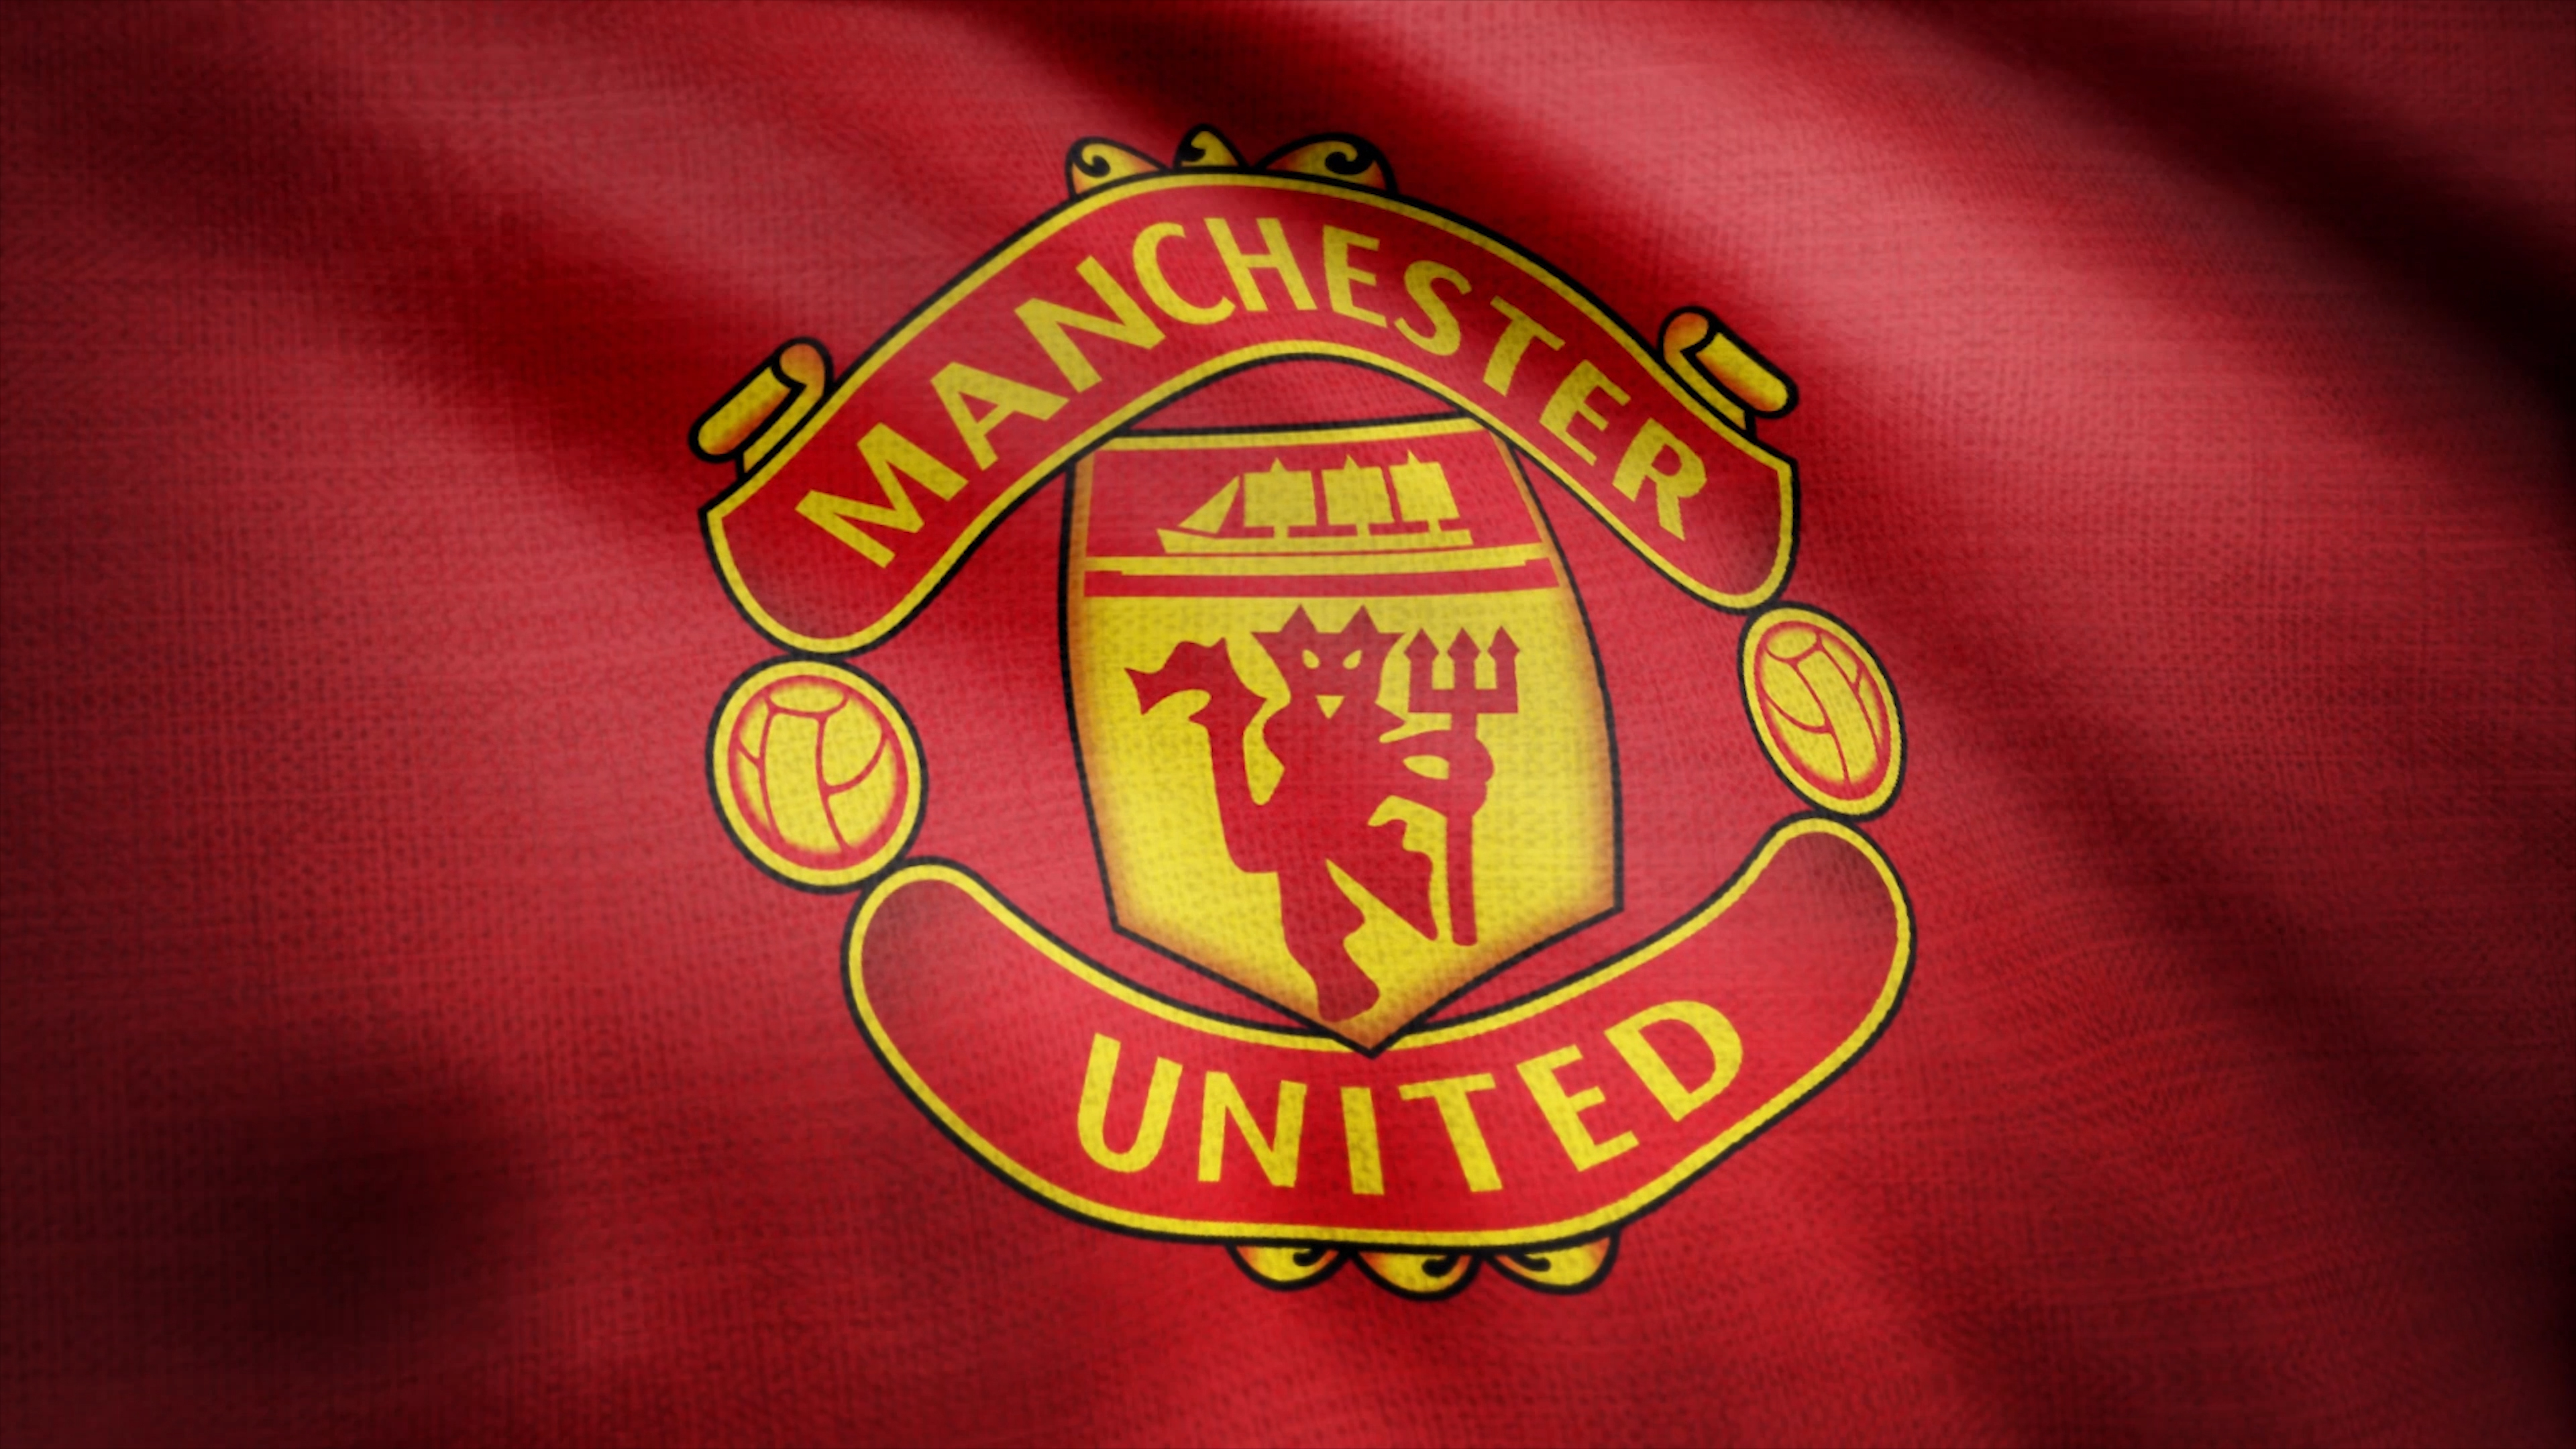 Manchester United's badge 